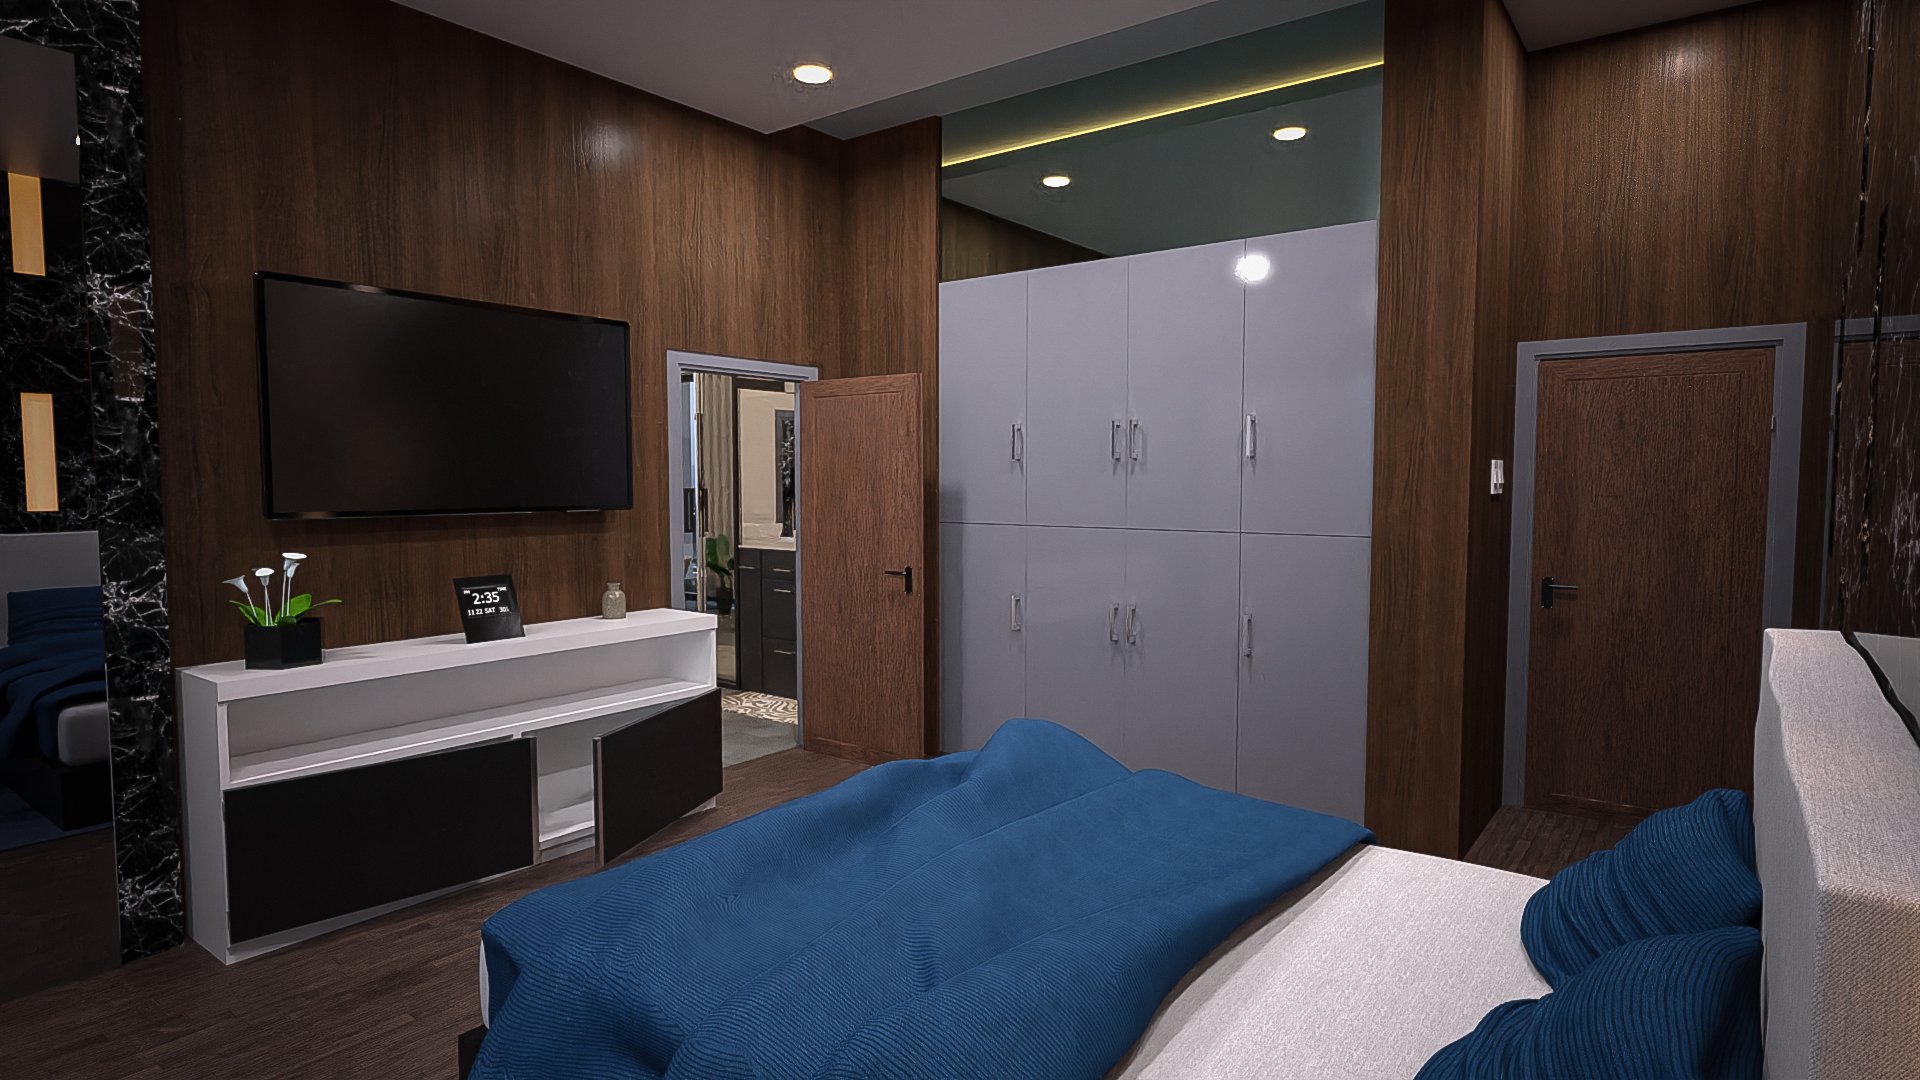 High Rise Bedroom by: Tesla3dCorp, 3D Models by Daz 3D